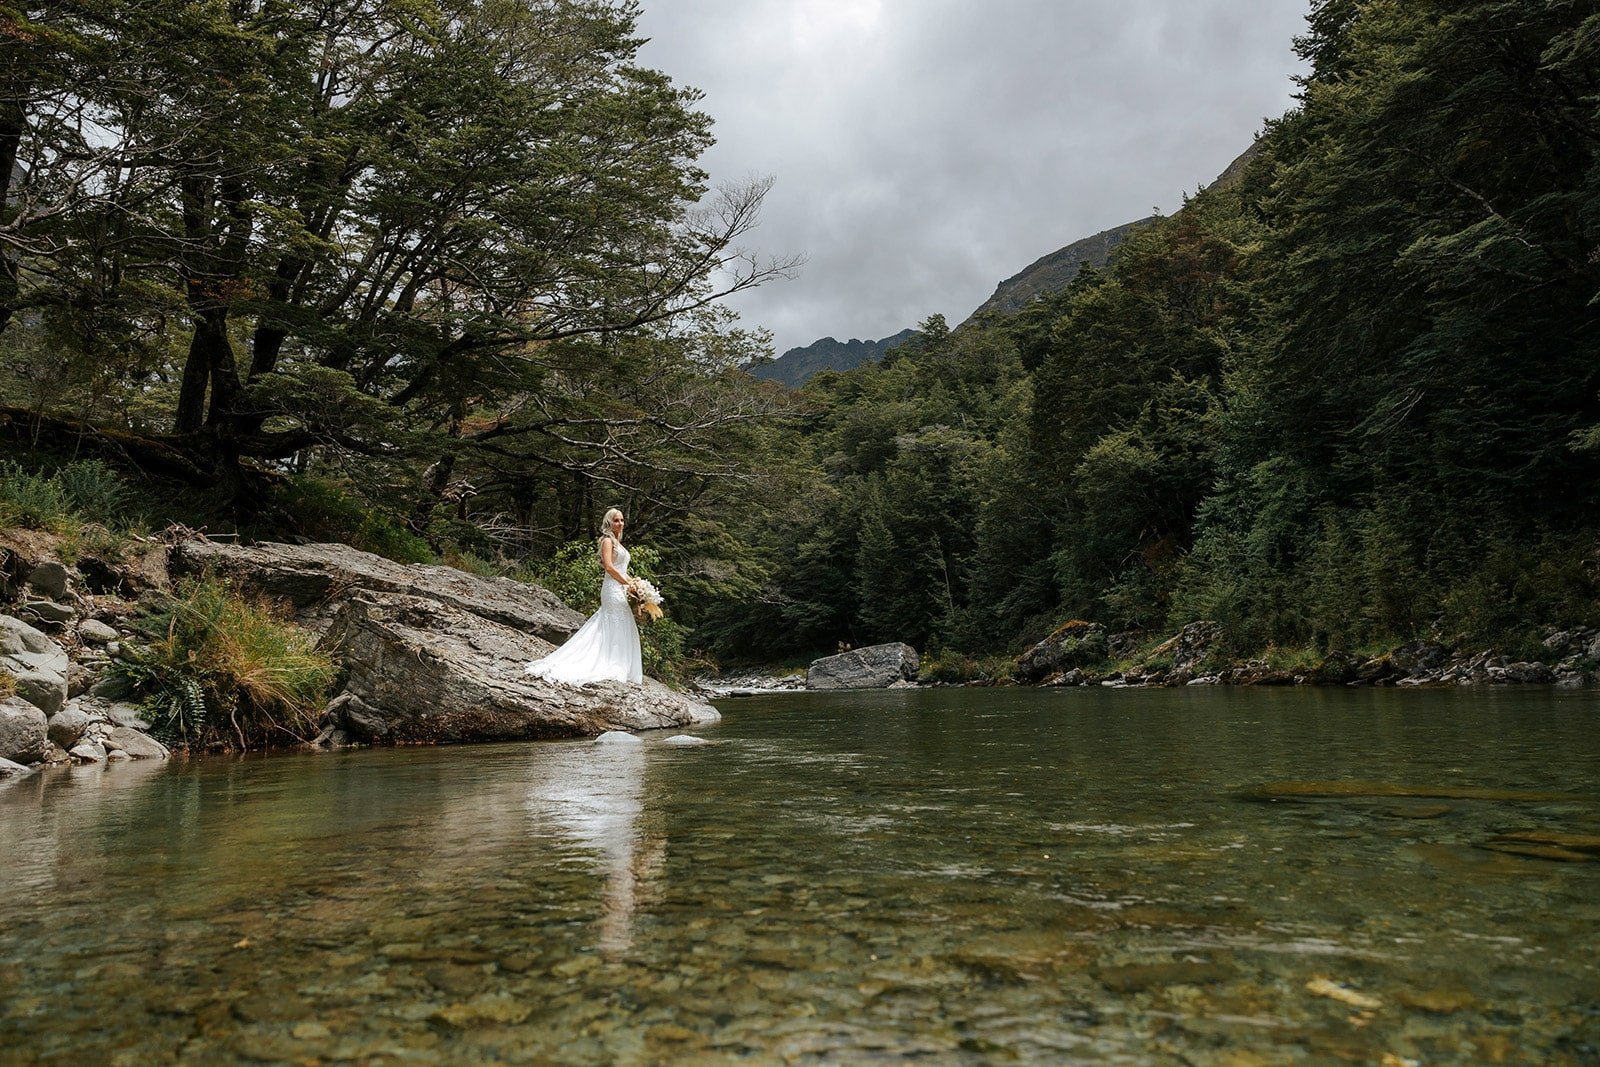 Heli Wedding in a beautiful forrest next to a river in Queenstown, secret wedding locations